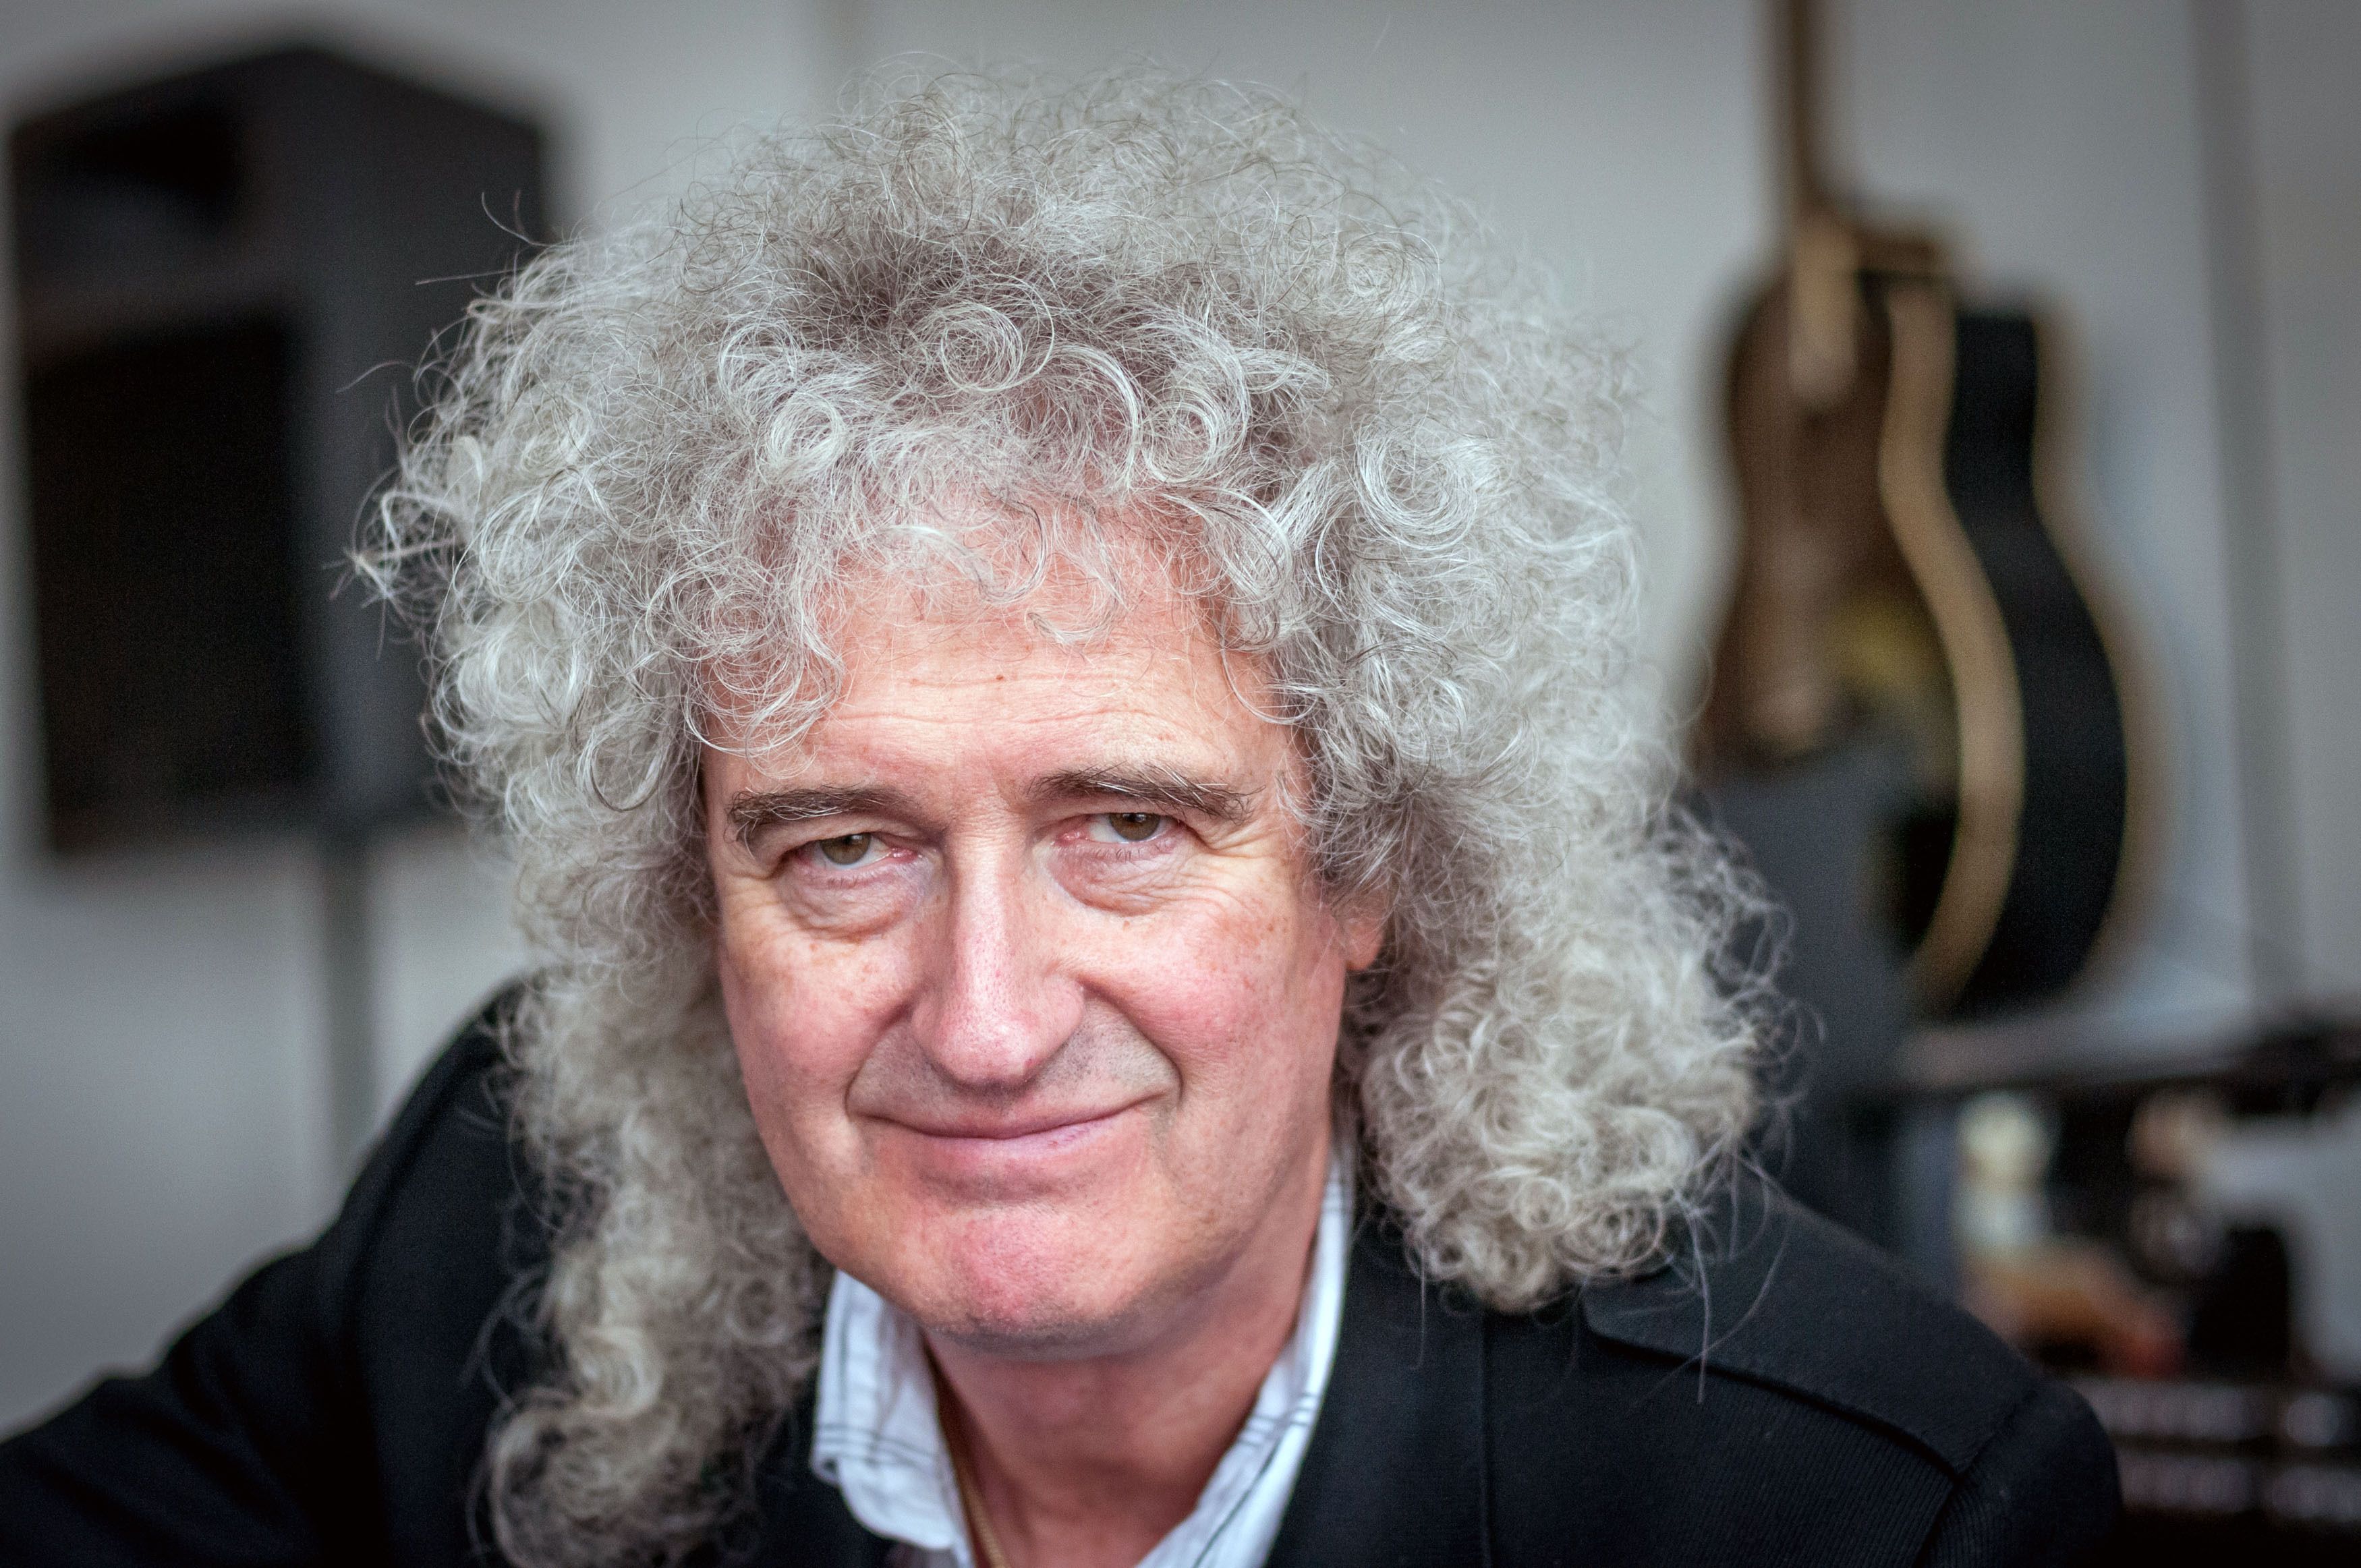 Brian May Wallpaper Image Photo Picture Background